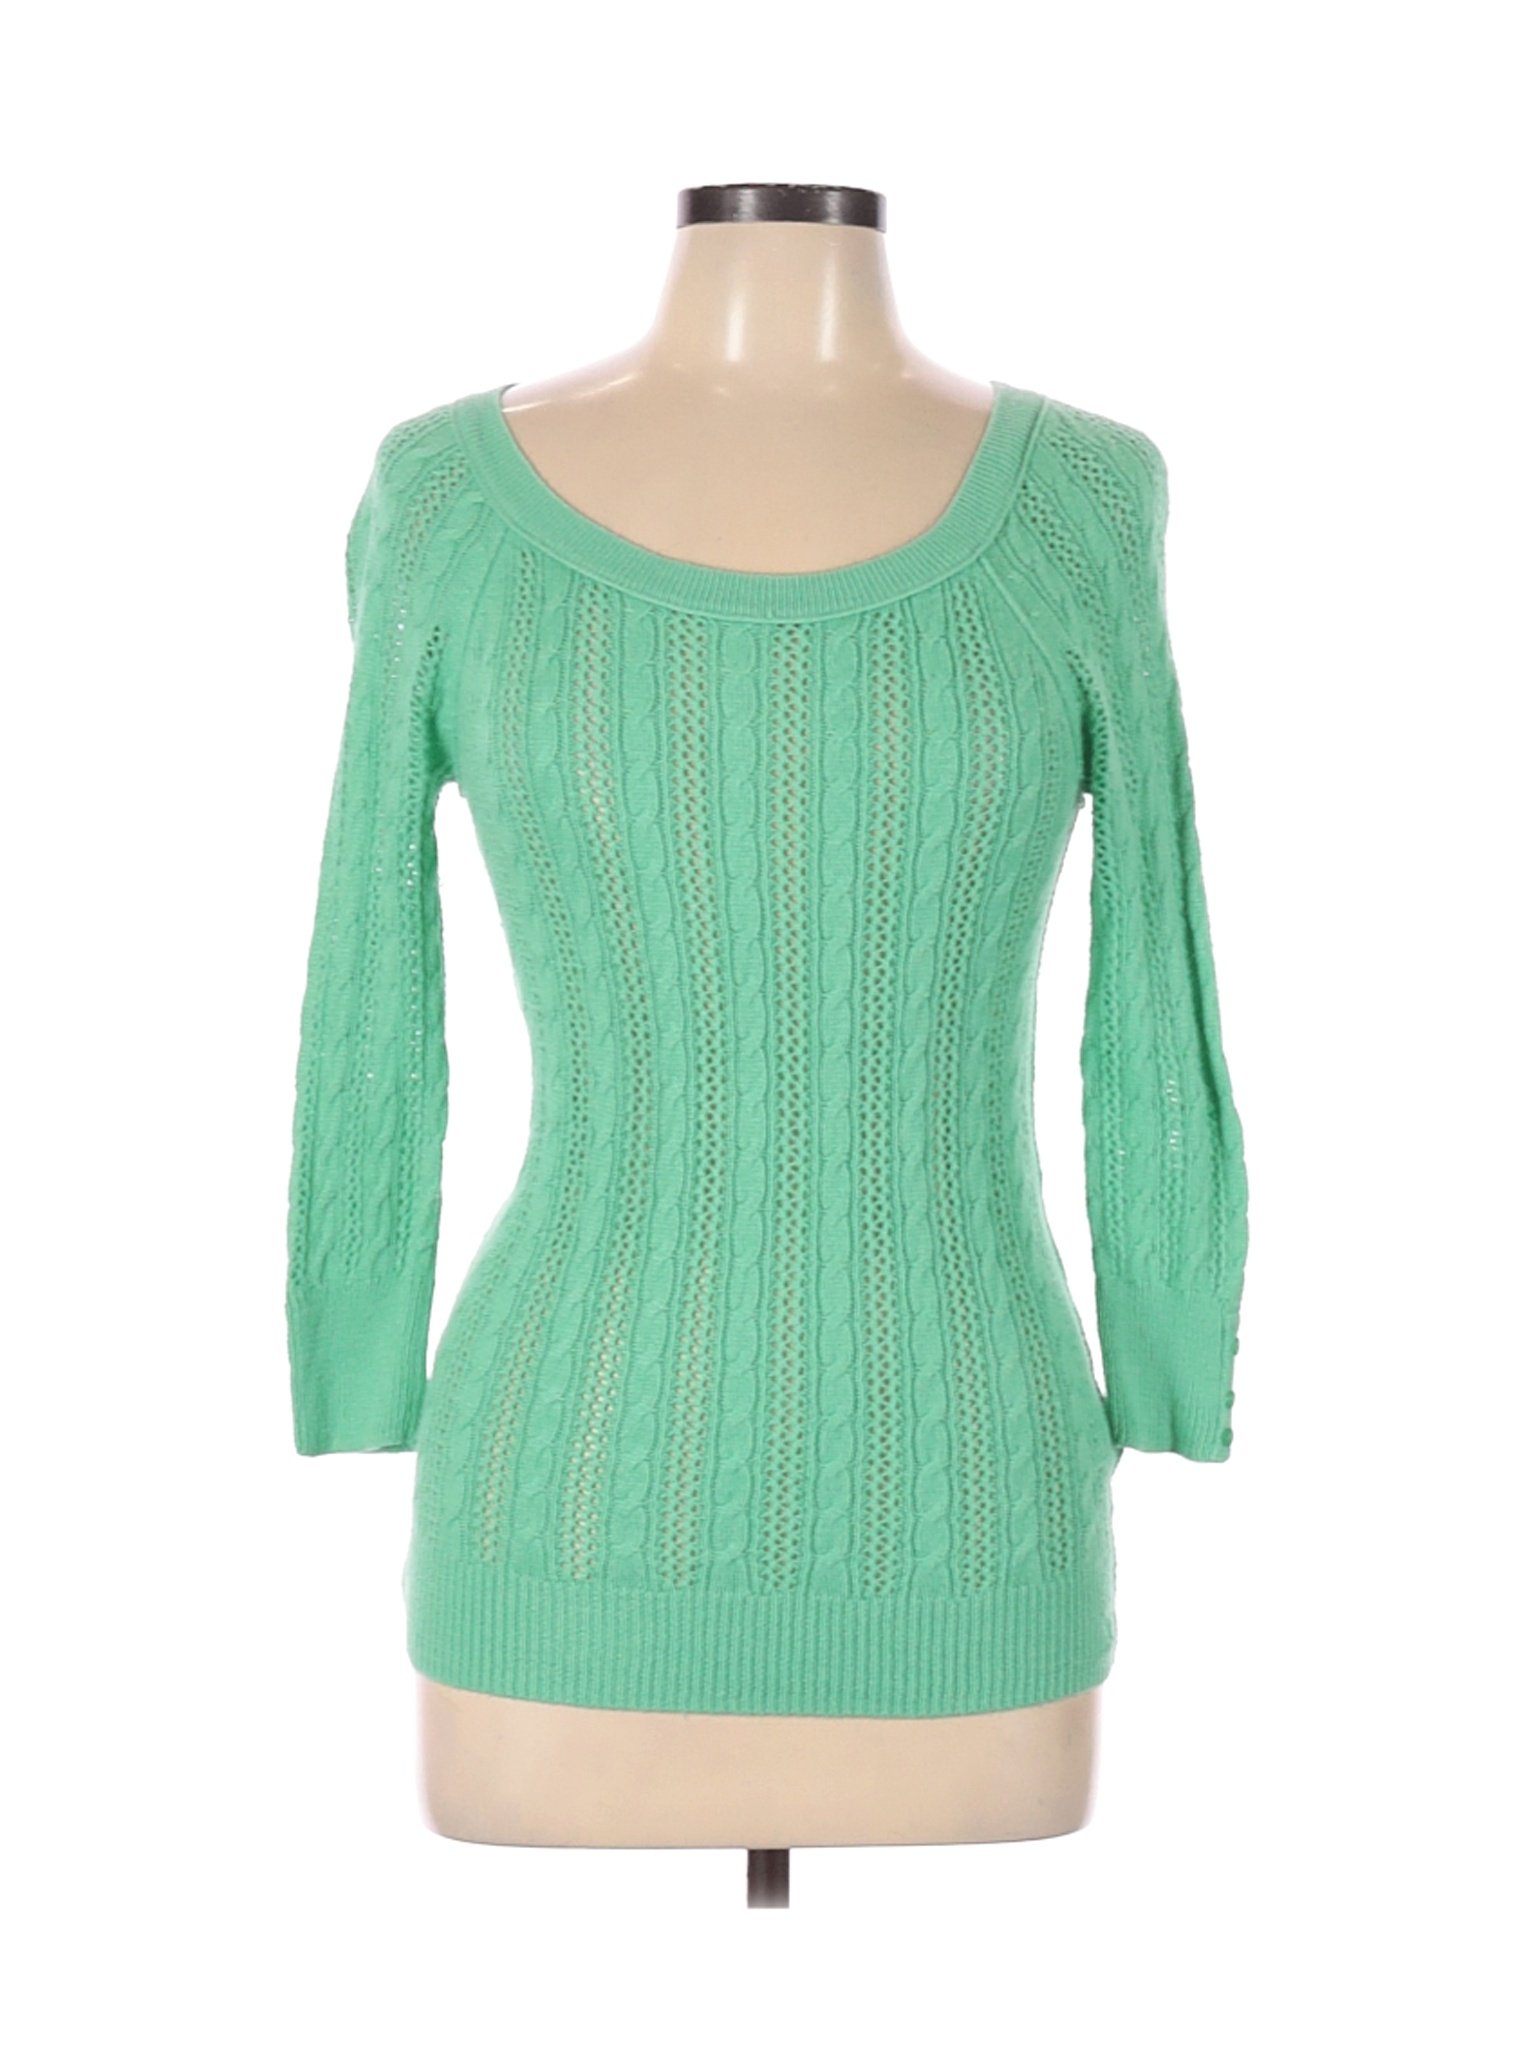 American Eagle Outfitters Women Green Pullover Sweater S | eBay